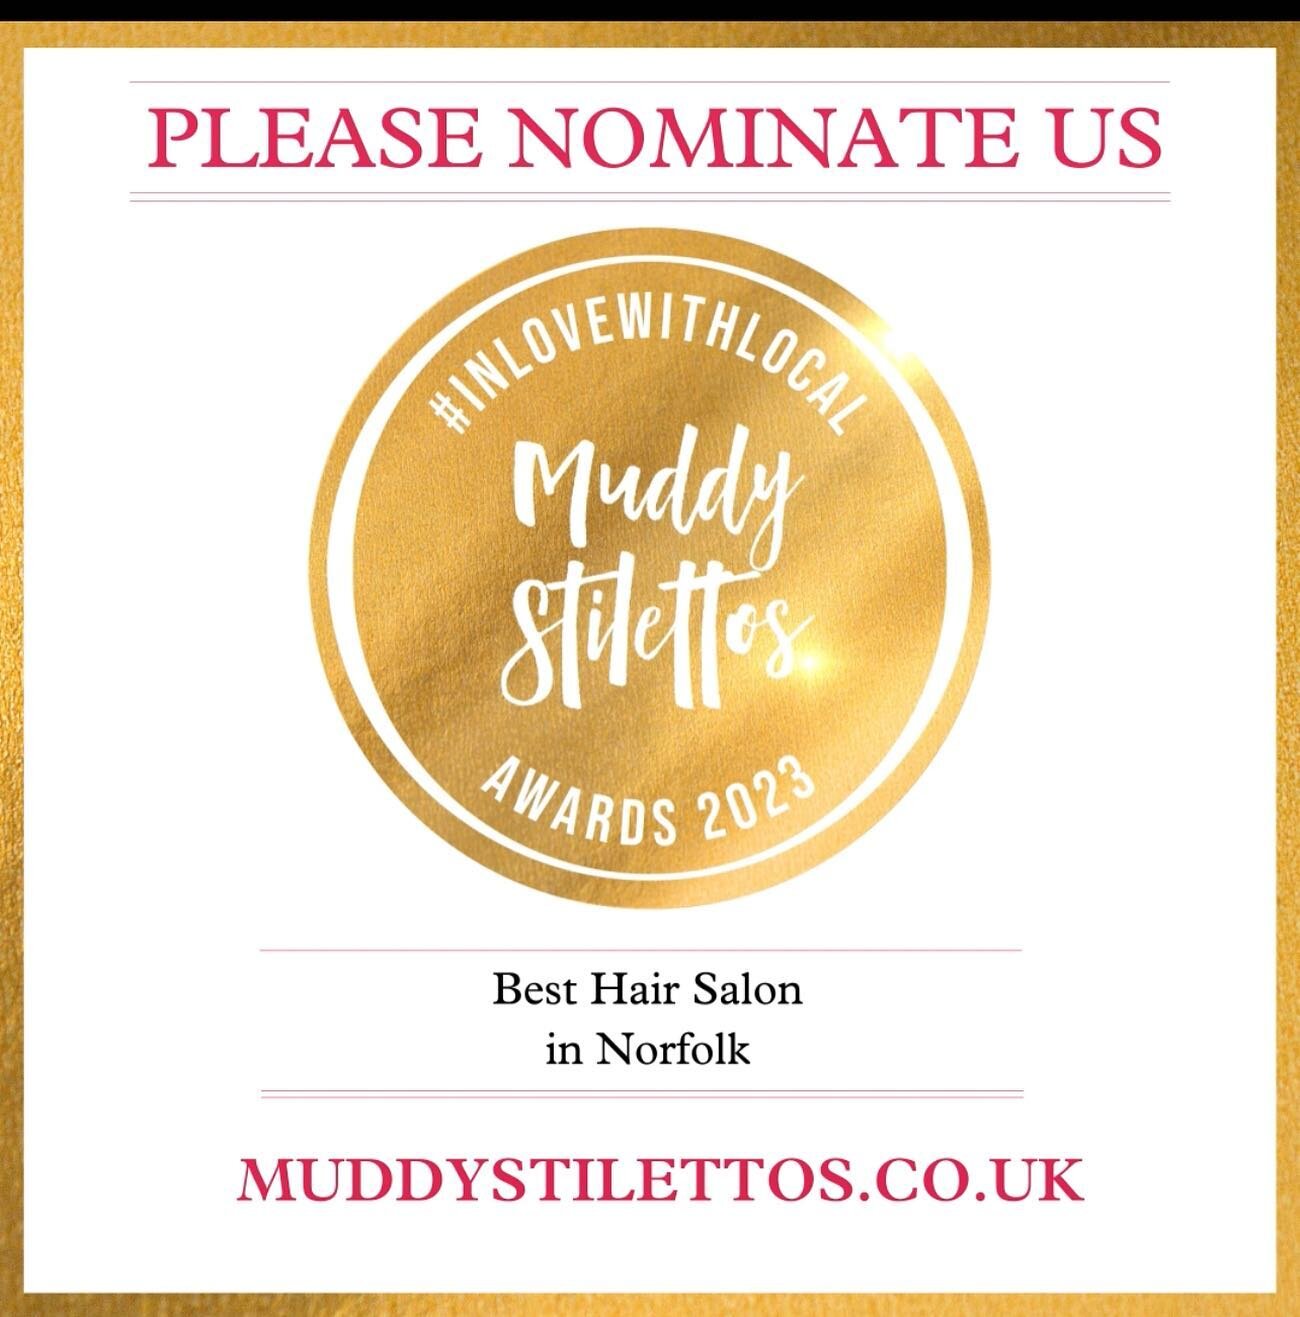 HEY GUYS, some very exiting news, the salon has been nominated for best hair salon in Norfolk, how exciting! We would love love love it if you took 2 minutes out of your day to nominate us so we can make it through to the next stage, the link is in t